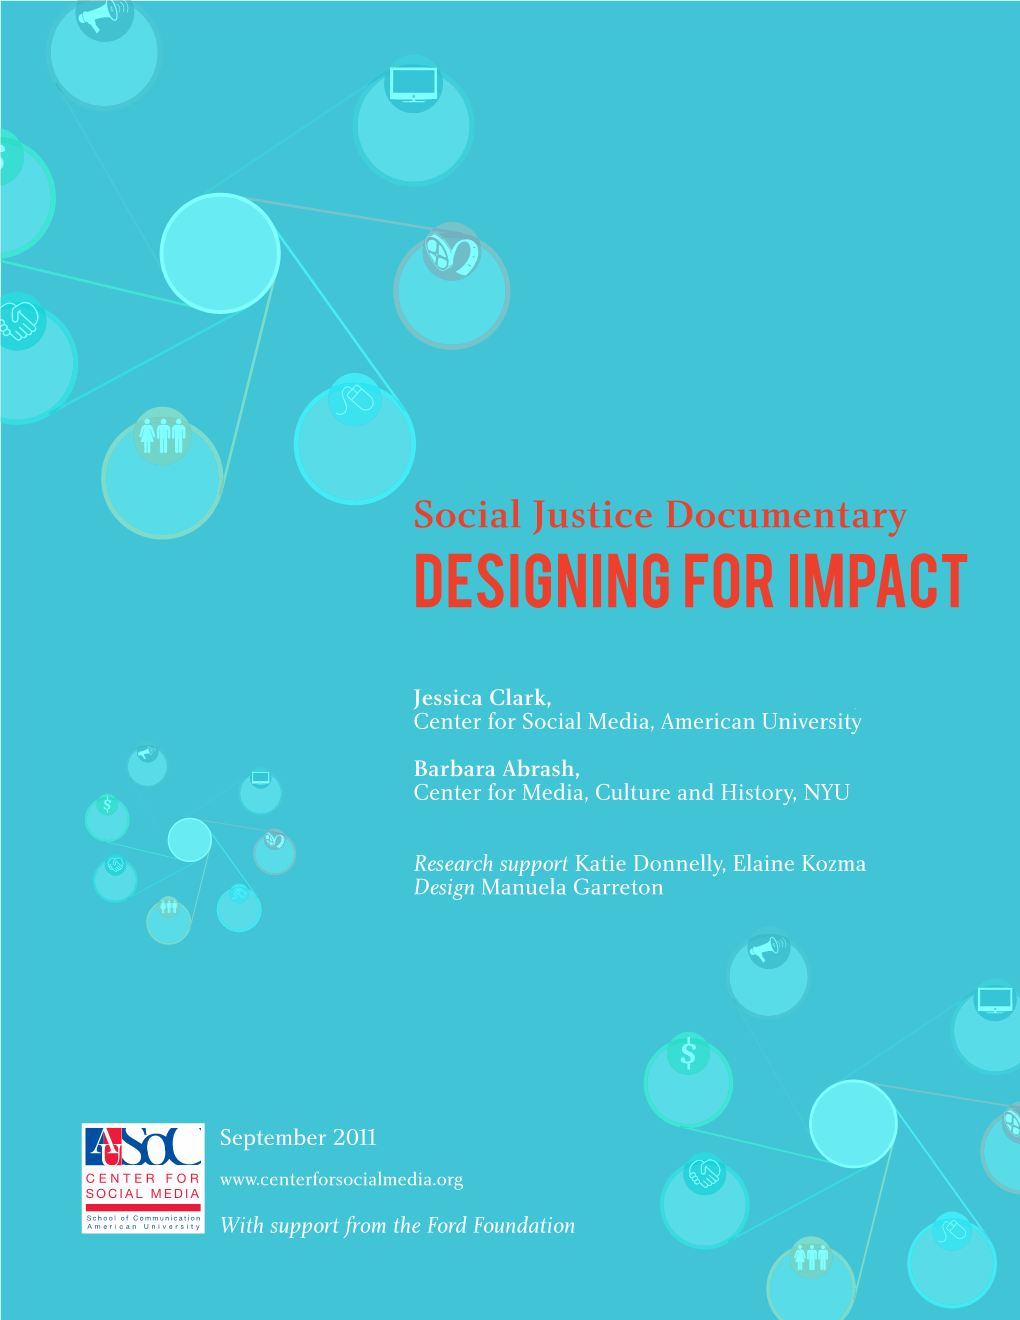 Social Justice Documentary: Designing for Impact